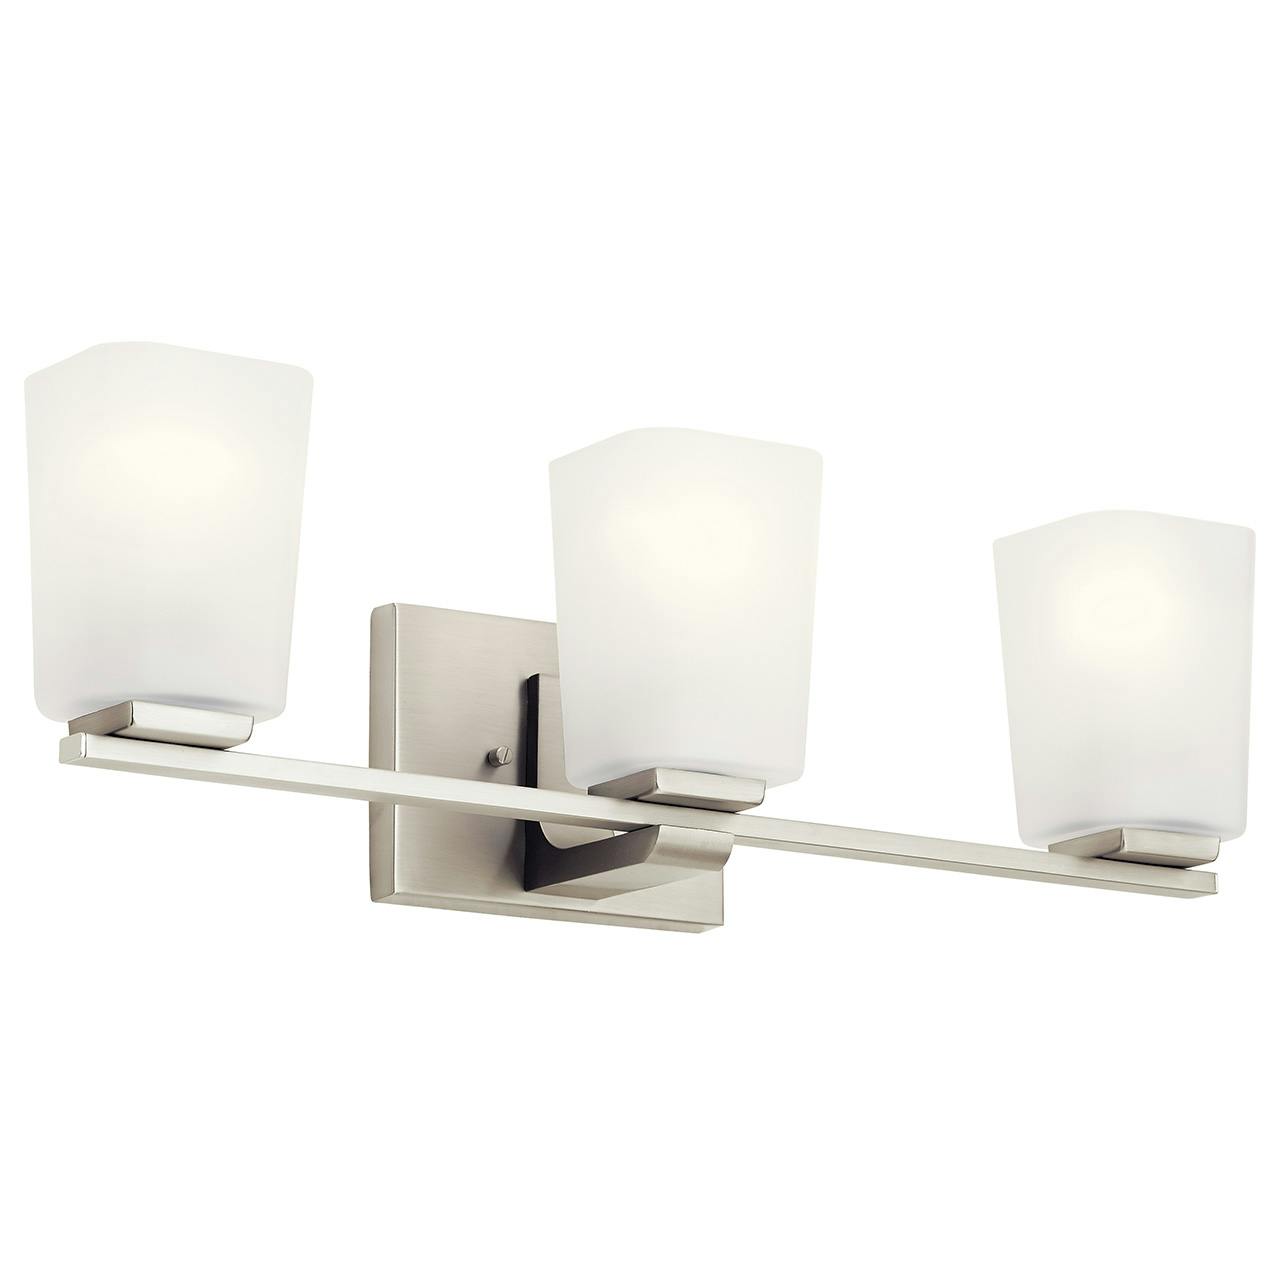 Roehm 3 Light Vanity Light Brushed Nickel on a white background